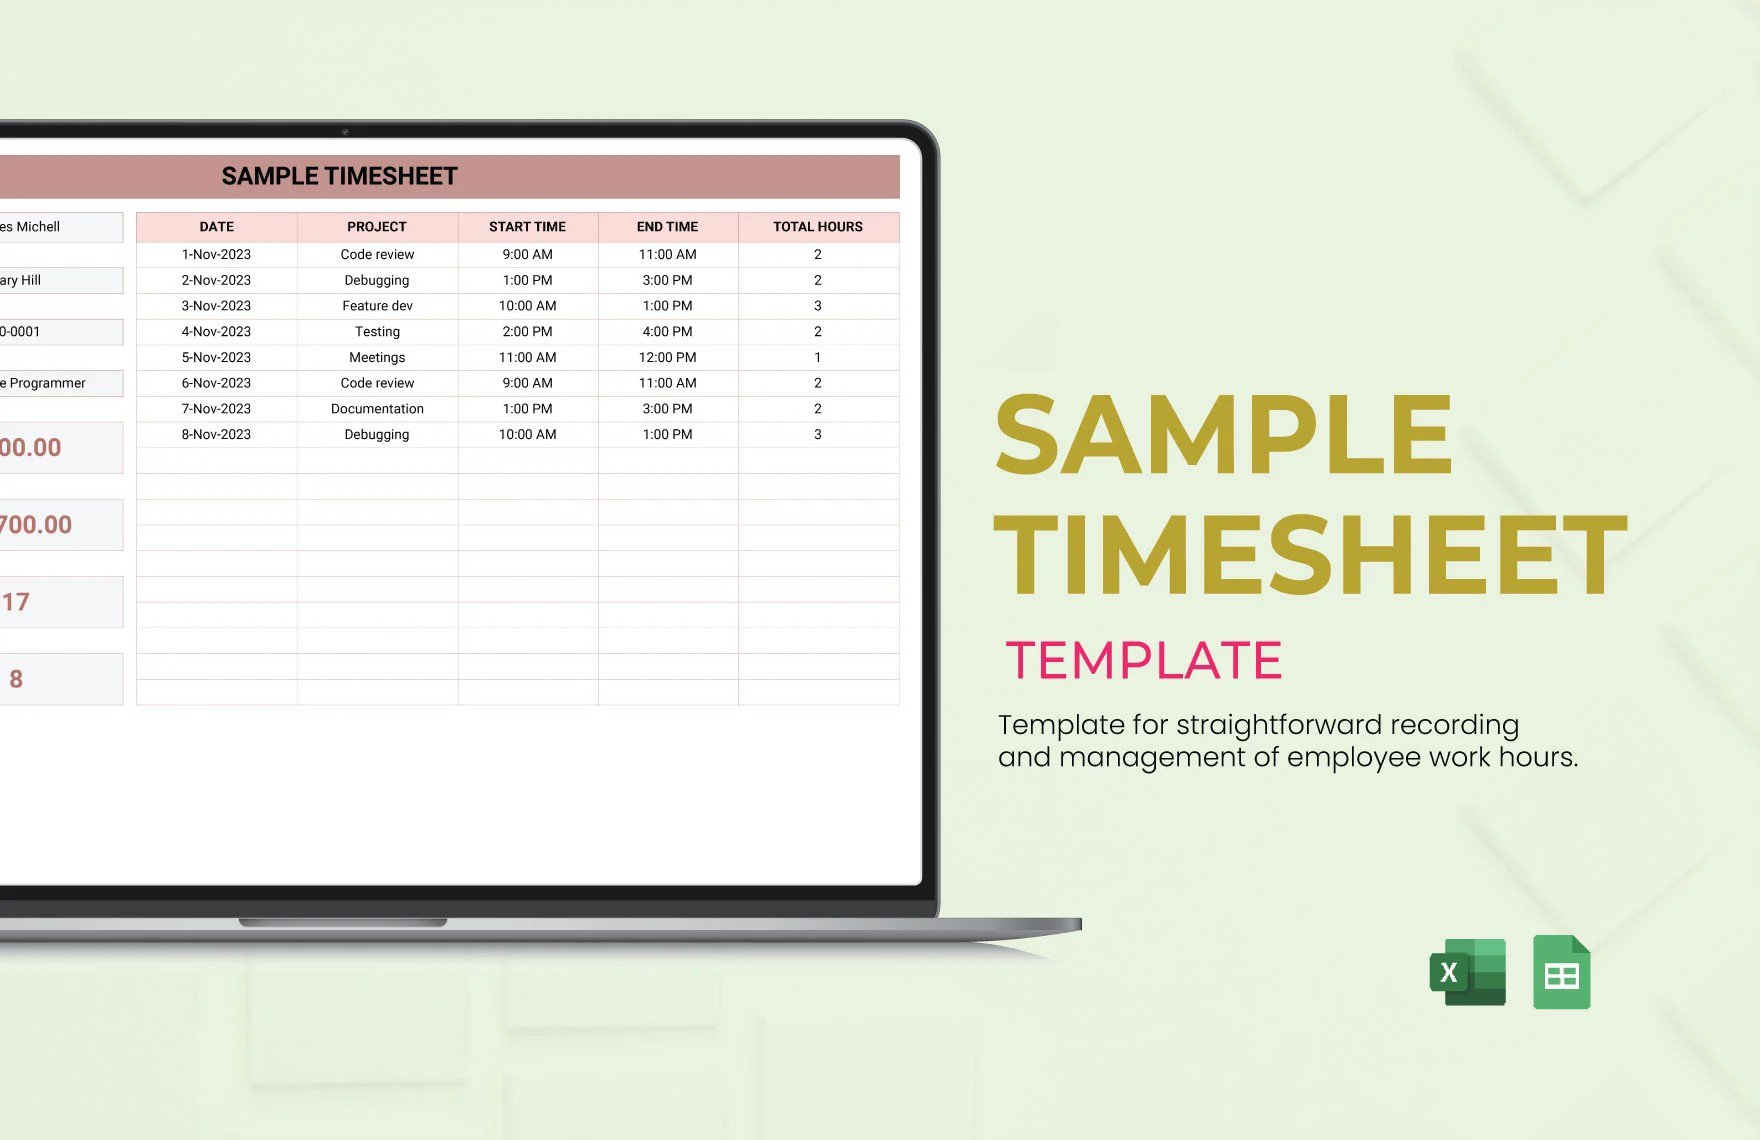 Free Sample Timesheet Template in Excel, Google Sheets